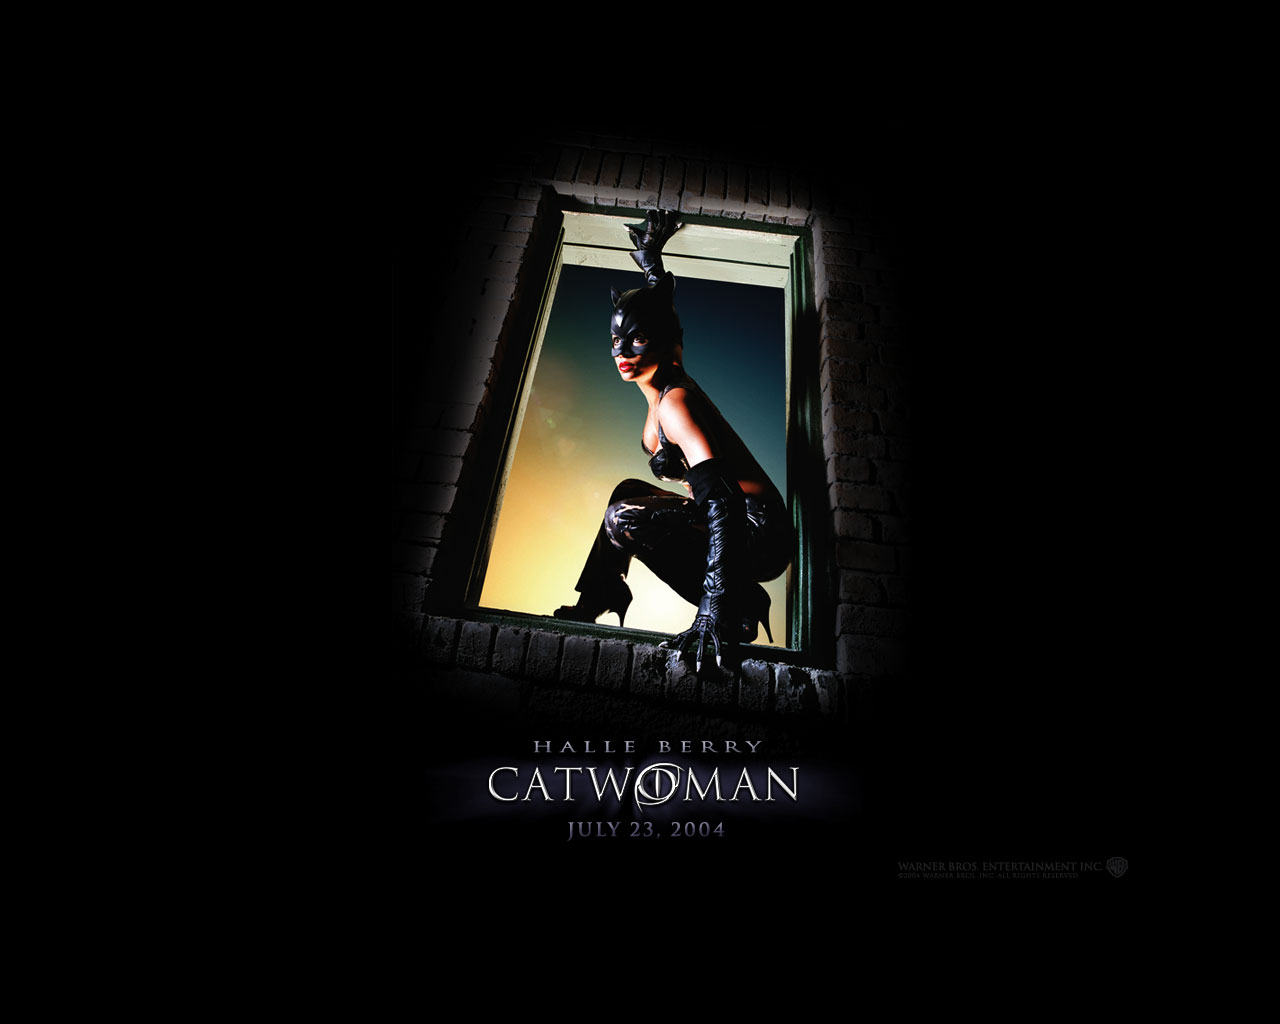 Background Wallpaper Cat Woman Halle Berry